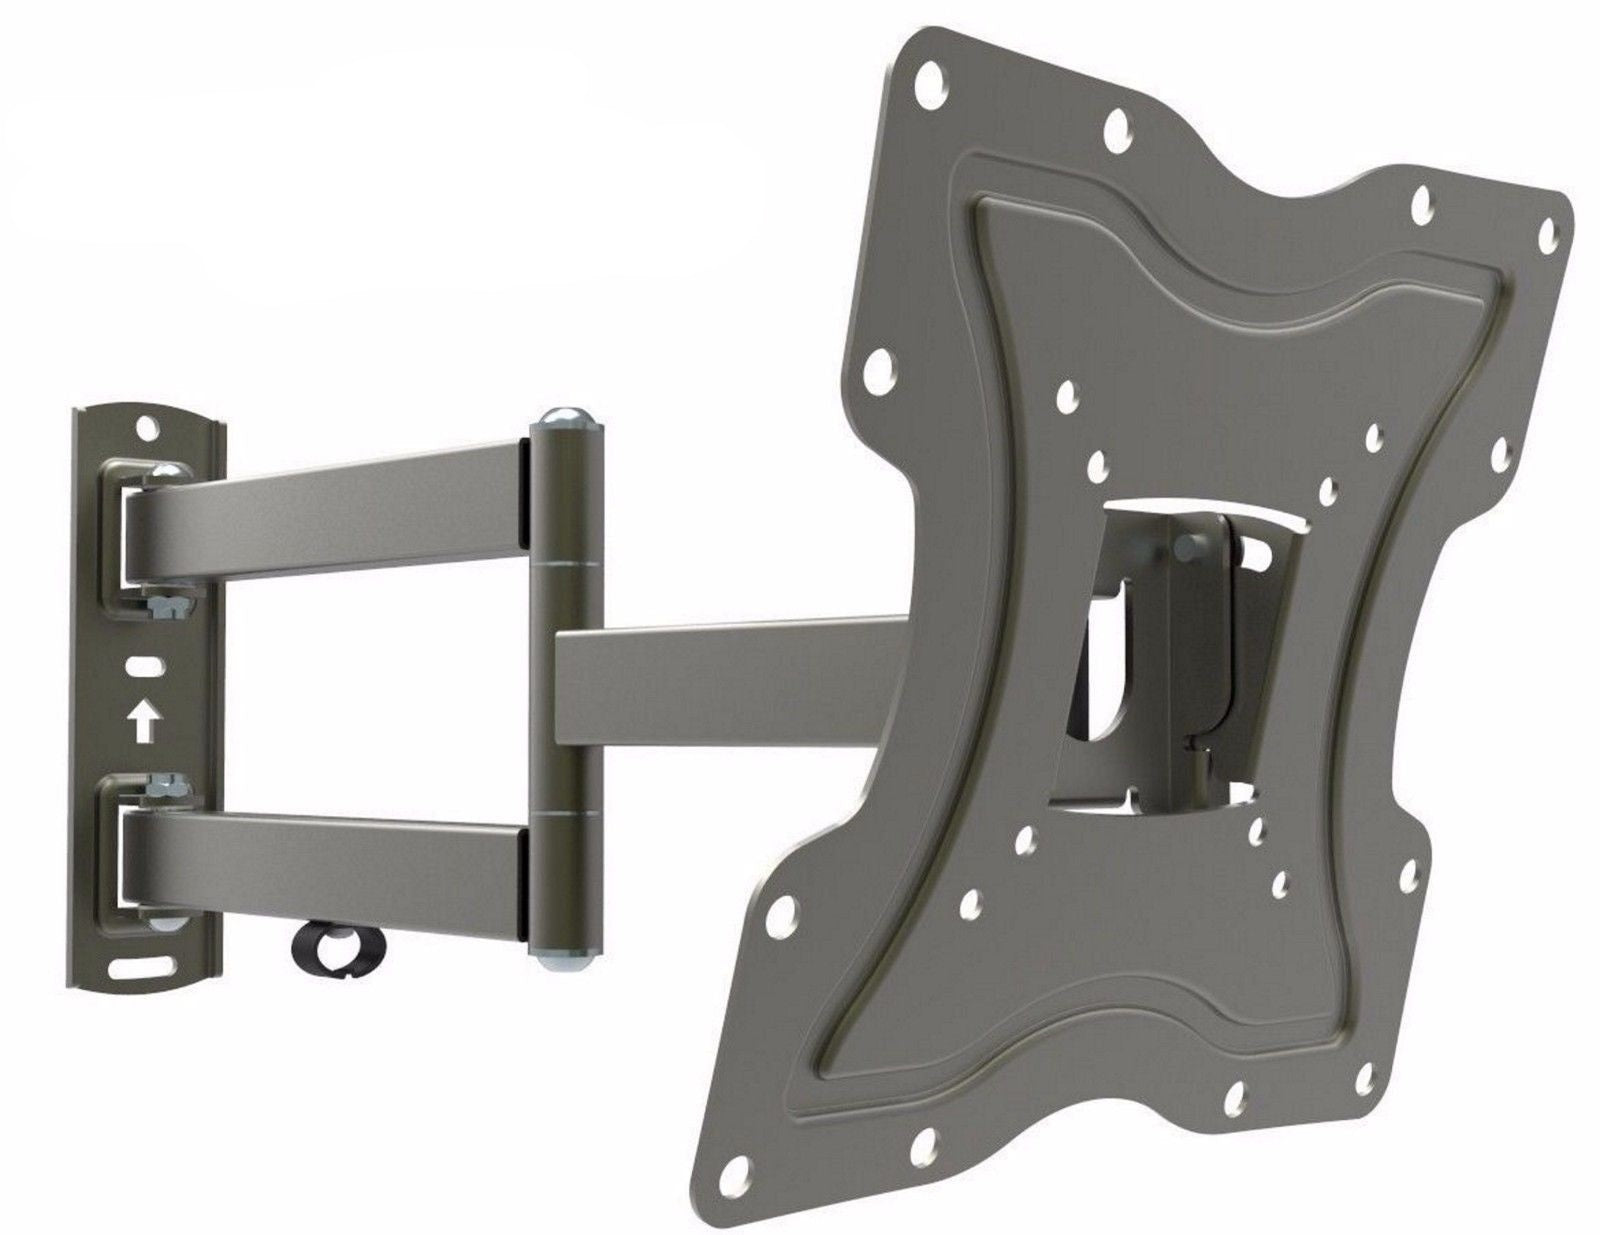 Husky Mounts Heavy Duty Full Motion TV Wall Mount Fits Most 32 – 55 Inch  LED LCD Flat Screen and Other with 400x400 400x200 300x300 300x200 200x200,  200x150 pattern, Loads 99 lb